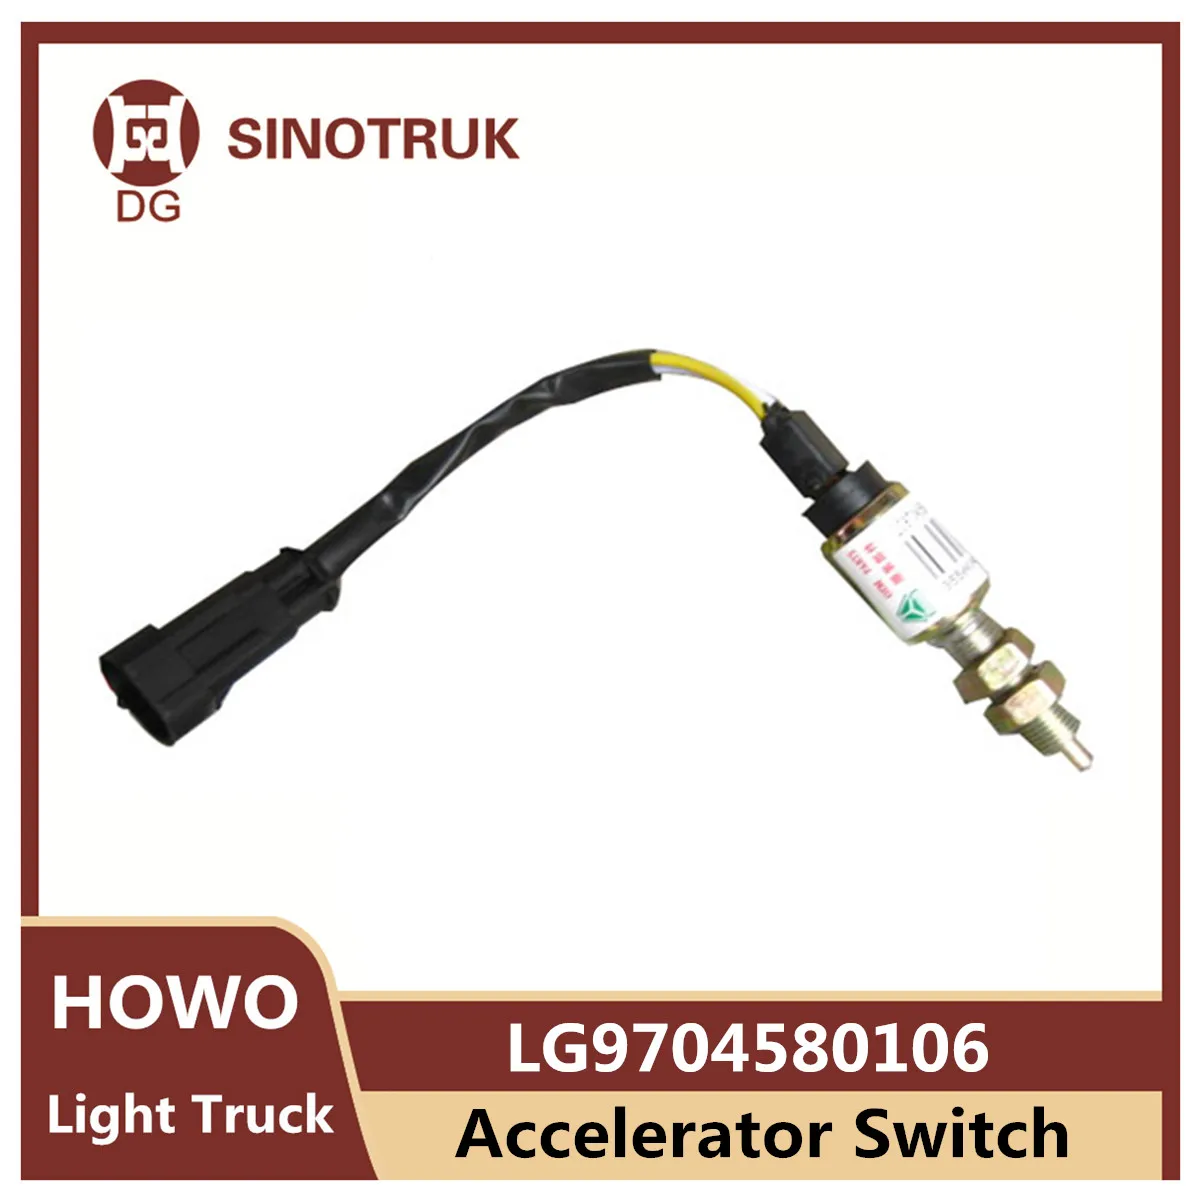 for cnhtc sinotruk truck parts sitrak howo a7 t7h t5g hohan wg9725584060 pto knob 270 degrees remote electronic throttle control Accelerator Switch LG9704580106 for Sinotruk Howo Light Truck Clutch Switch Original Auto Truck Parts